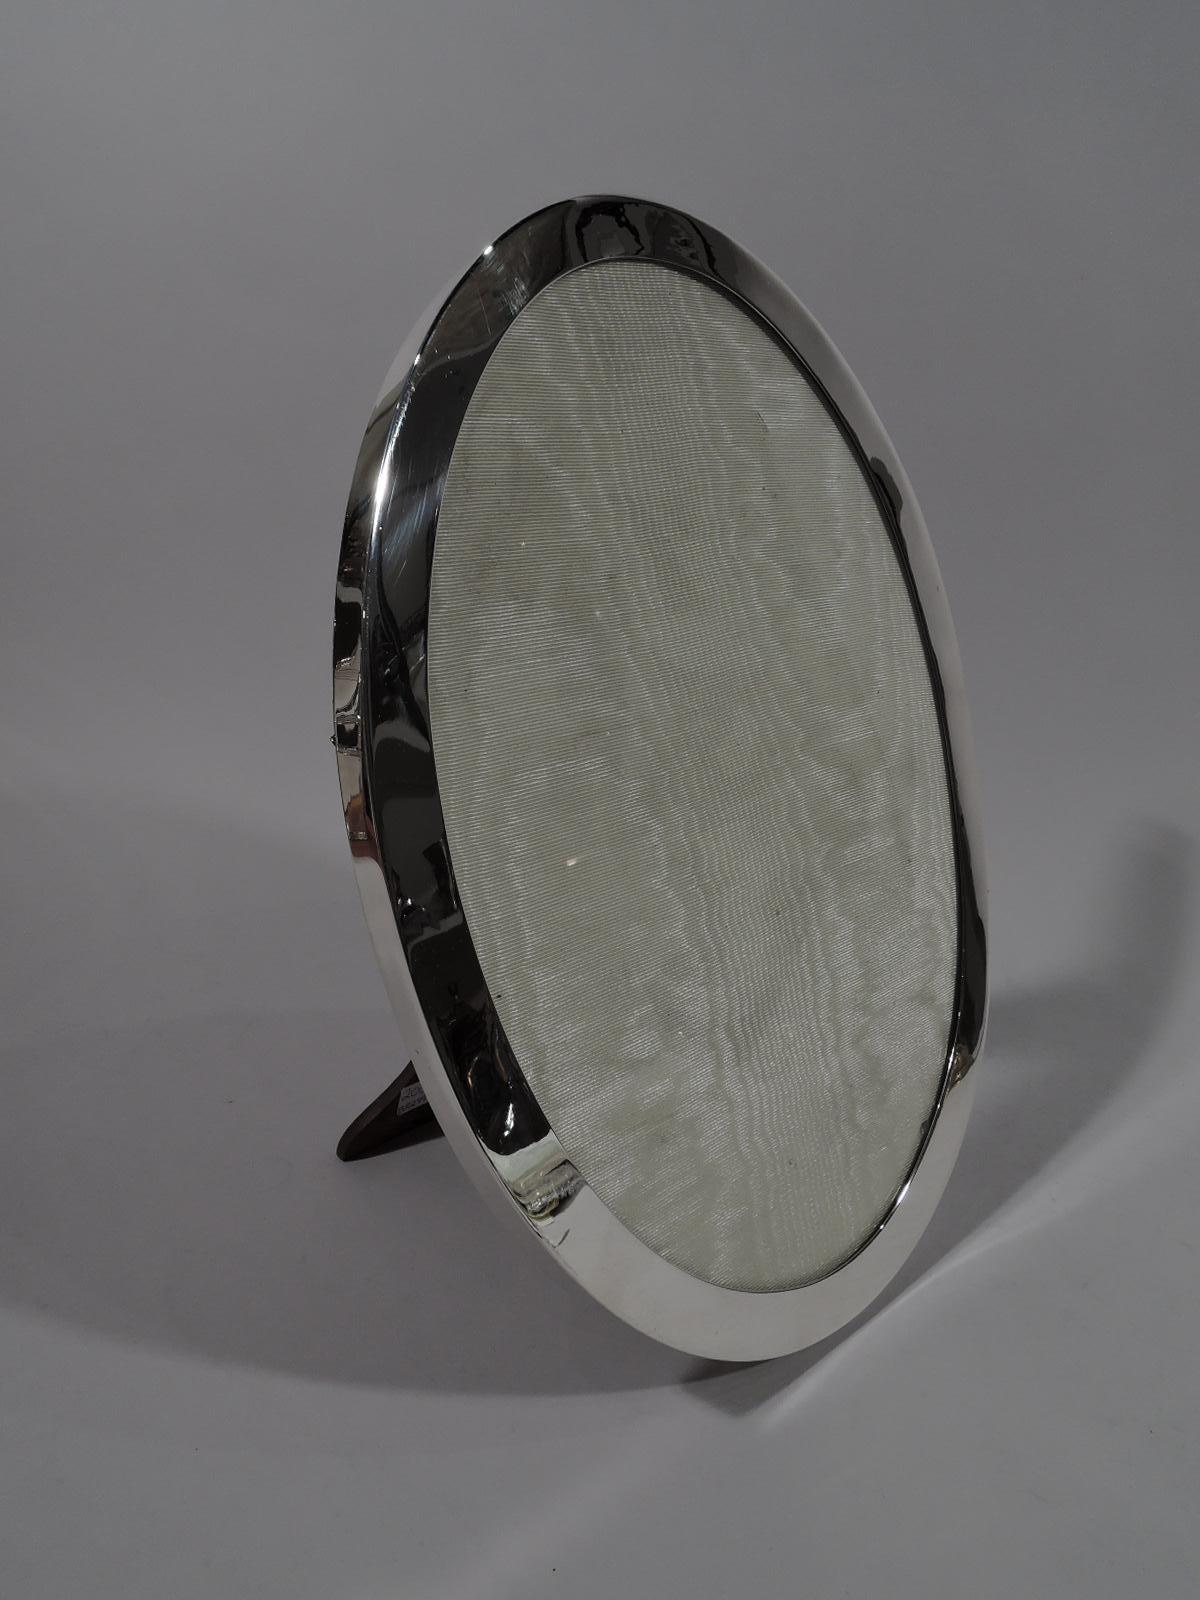 Modern sterling silver picture frame. Made by Tiffany & Co. in New York, circa 1910. Oval window with flat surround. With glass, silk lining, and stained-wood back and hinged support. Fully marked including pattern no. 16101 and director’s letter